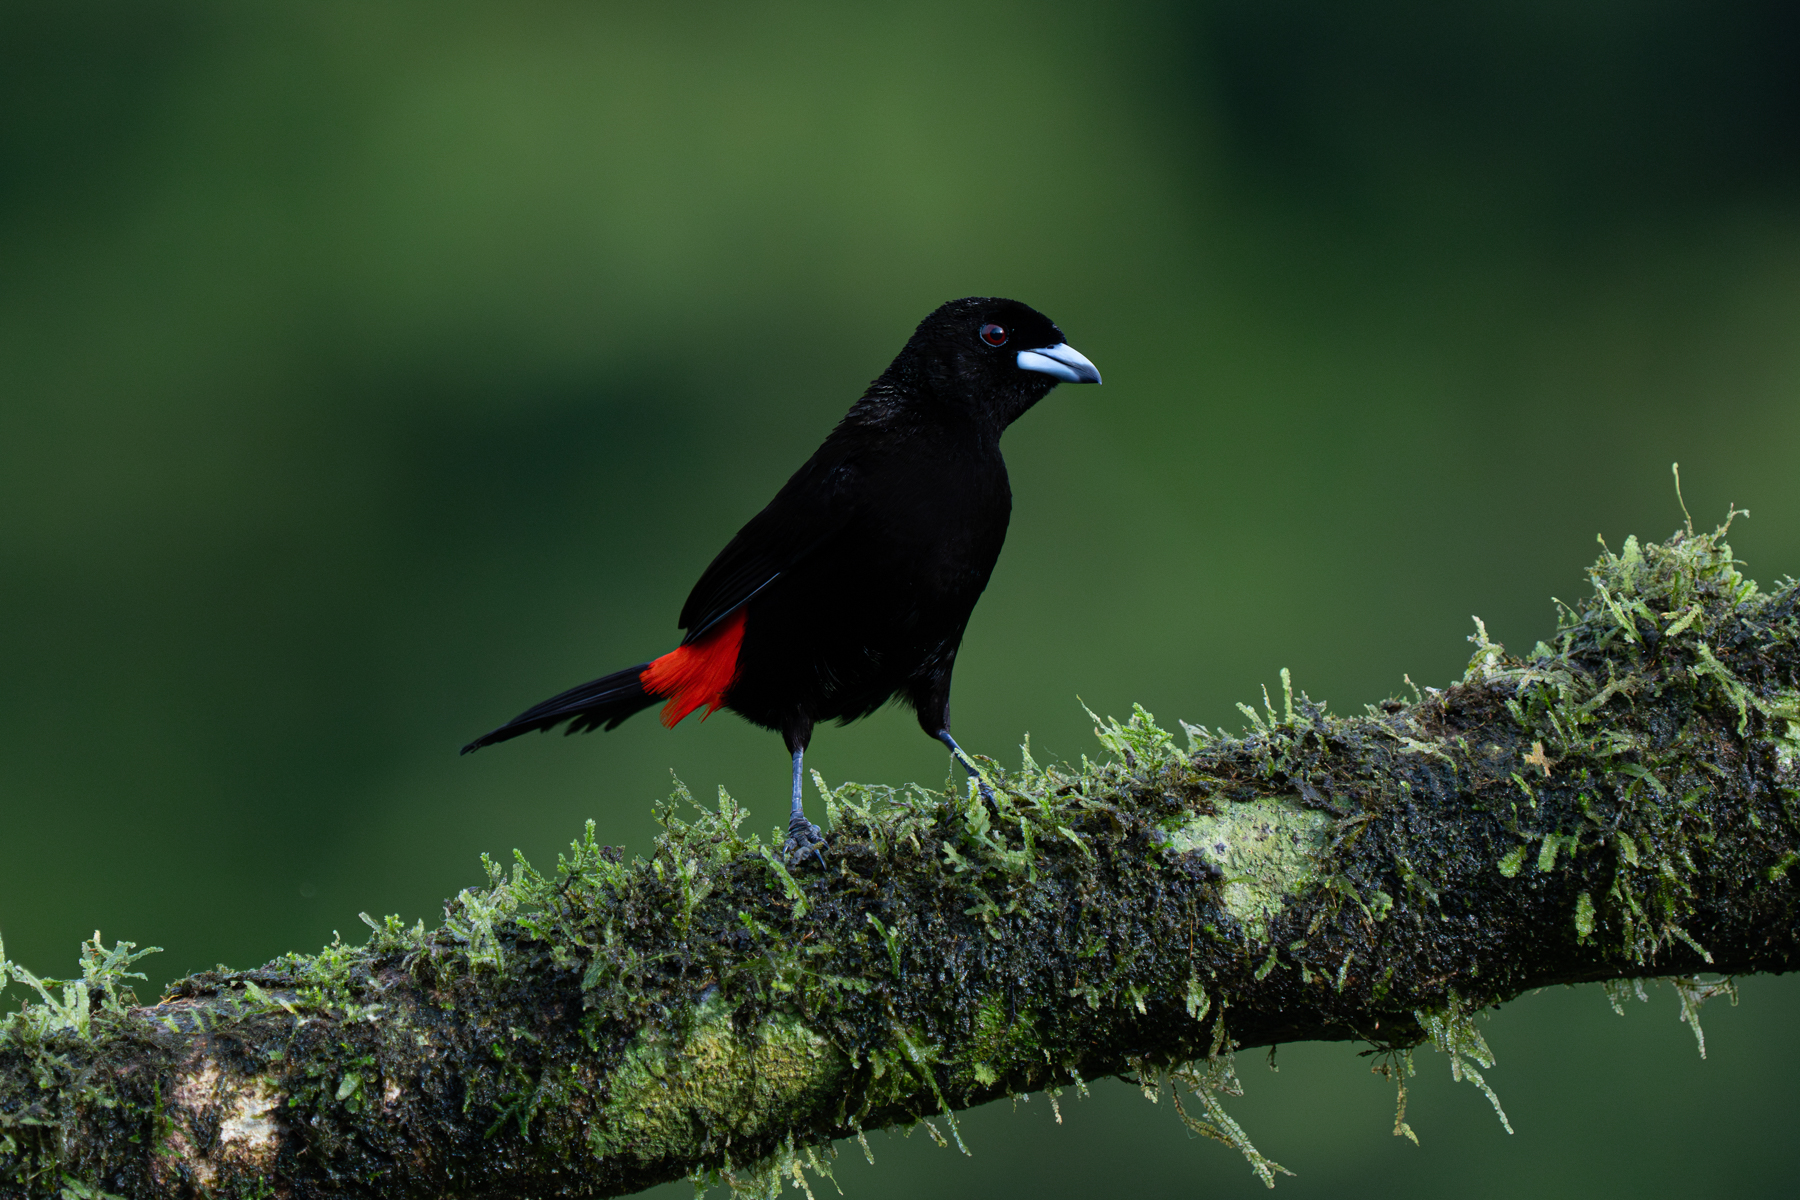 Adorable Scarlet-rumped Tanagers are quite common in Costa Rica and also very photogenic! (image by Inger Vandyke)